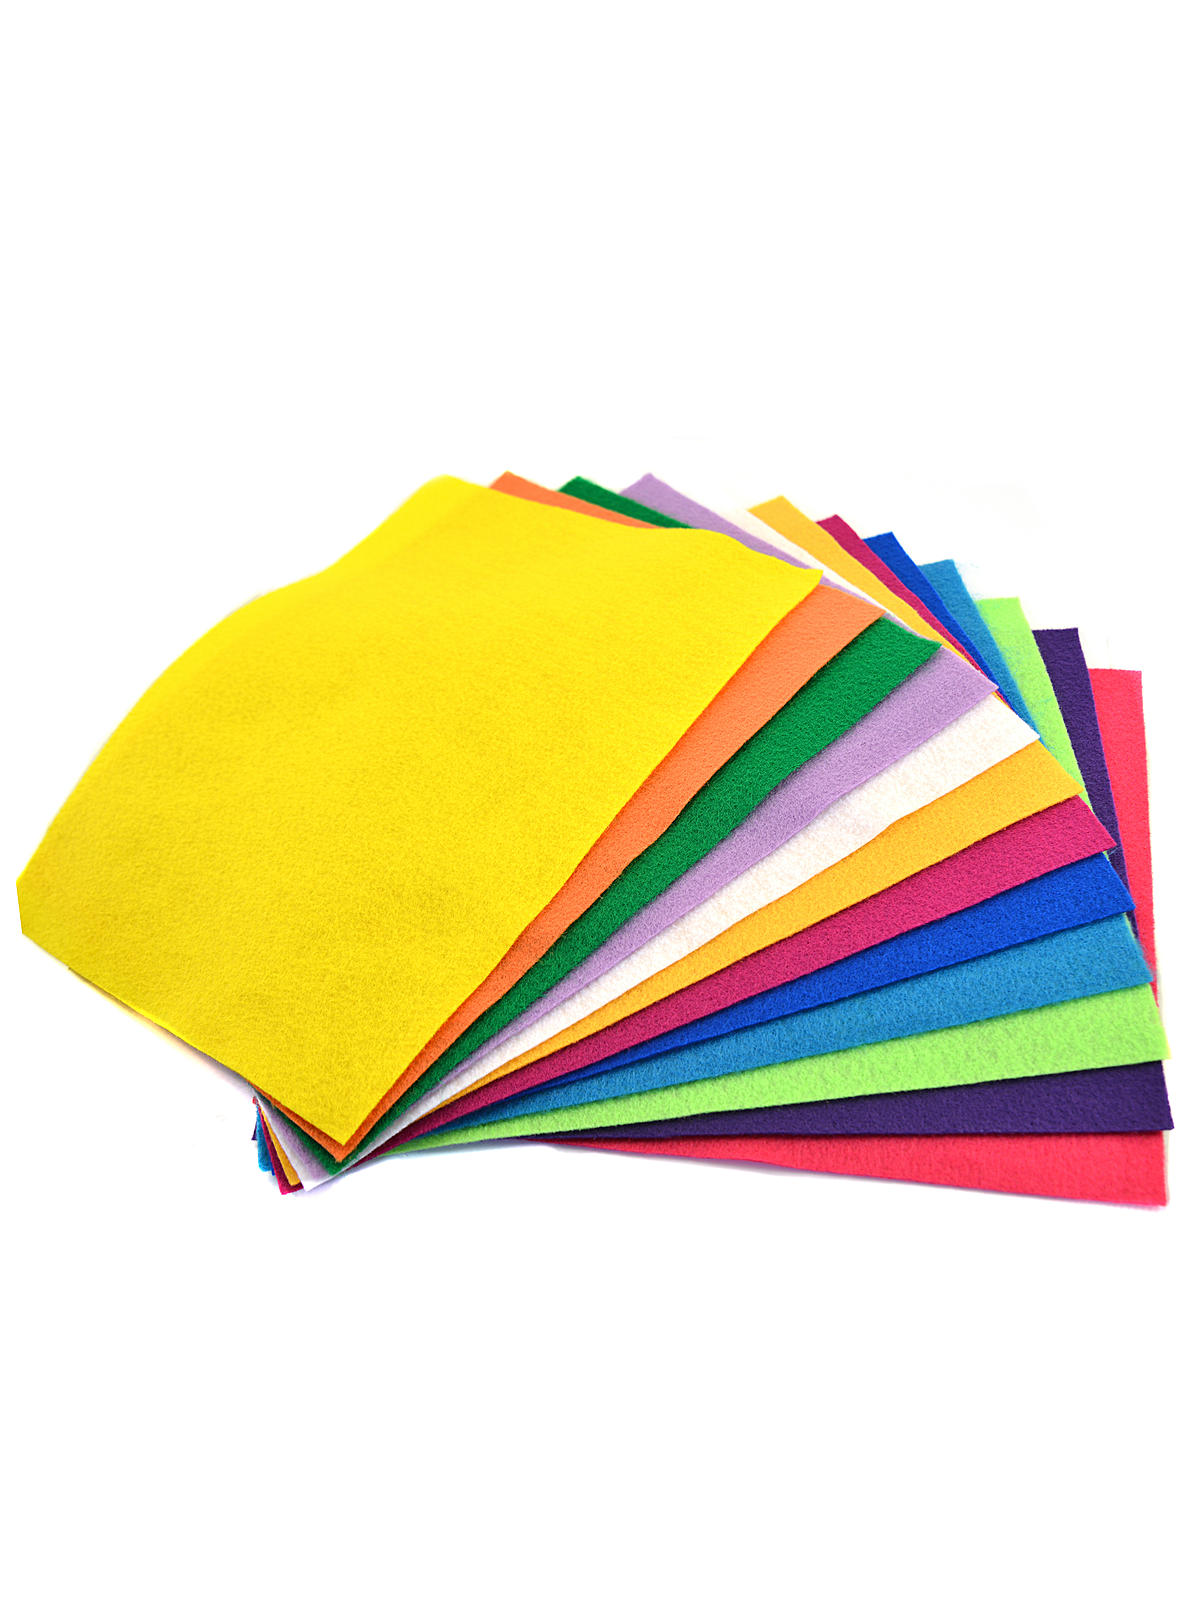 Rainbow Classicfelt 9 In. X 12 In. Pack Of 36 Assorted Colors